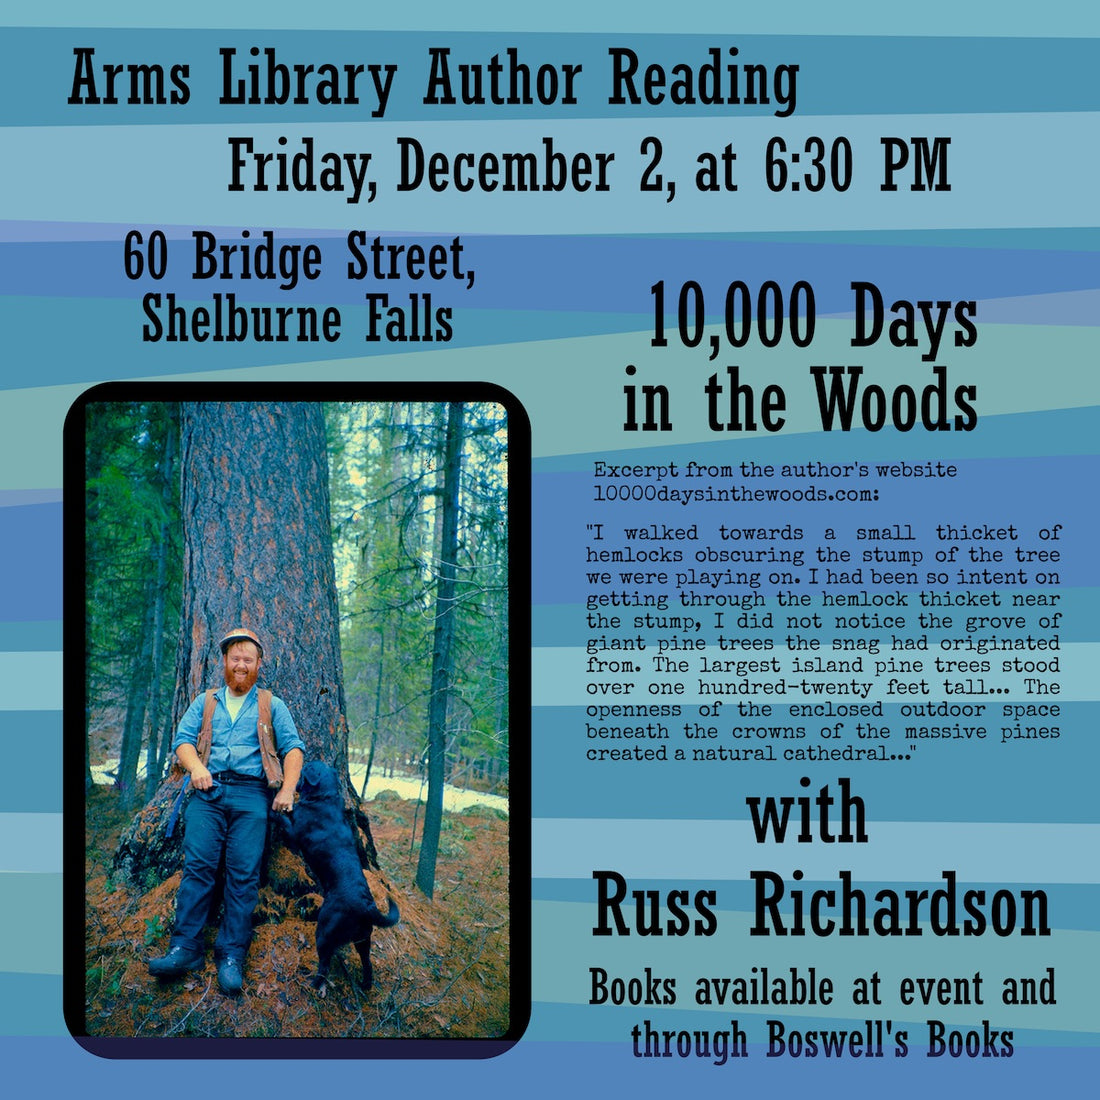 Russ Richardson Reading at Arms Library, Friday December 2